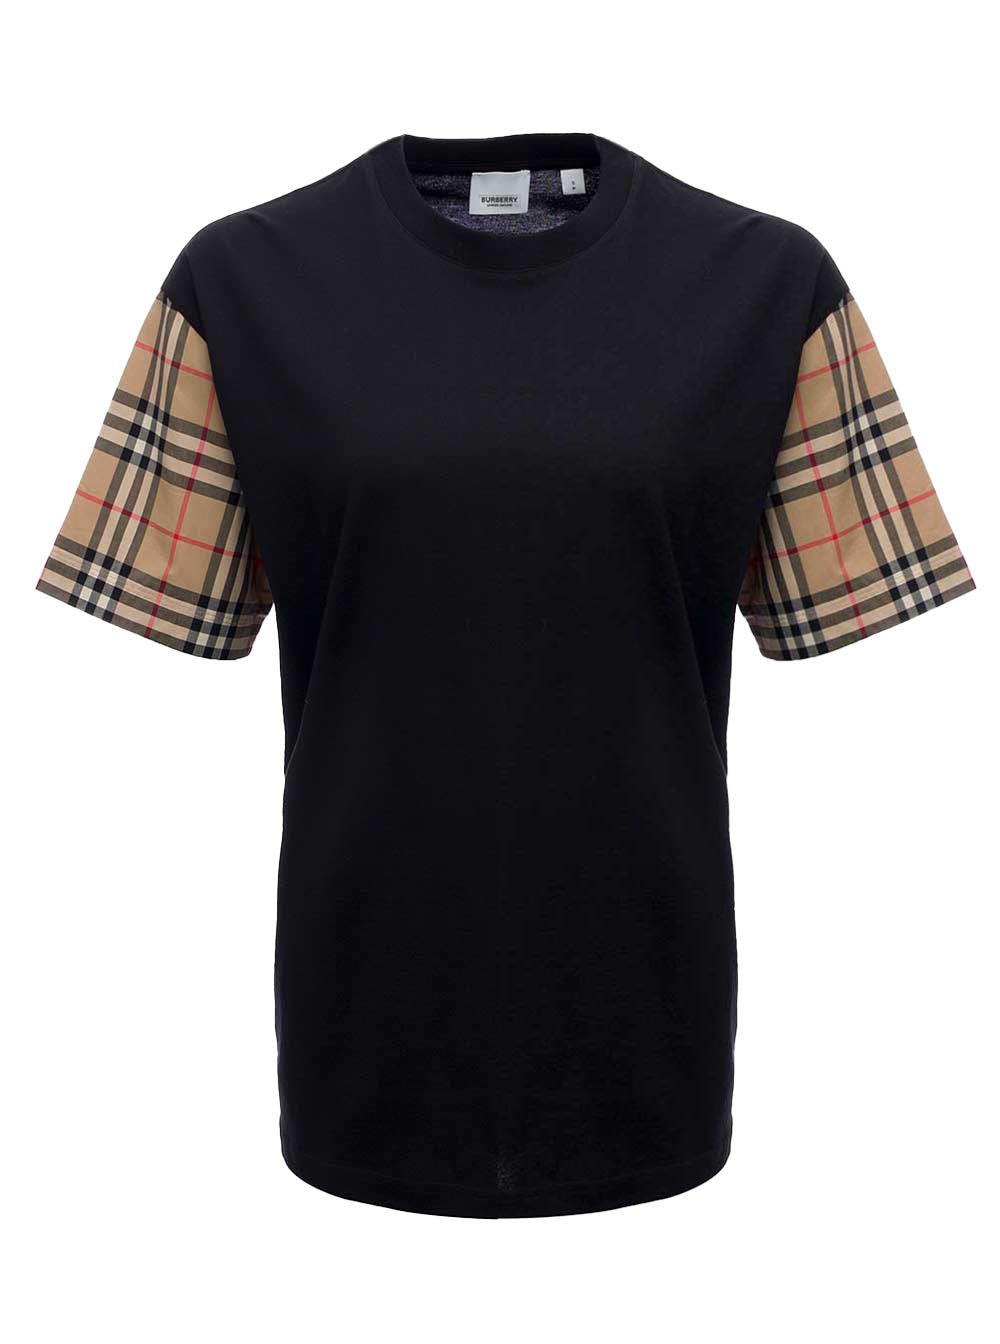 Burberry Black Cotton T-shirt With Vintage | Lyst